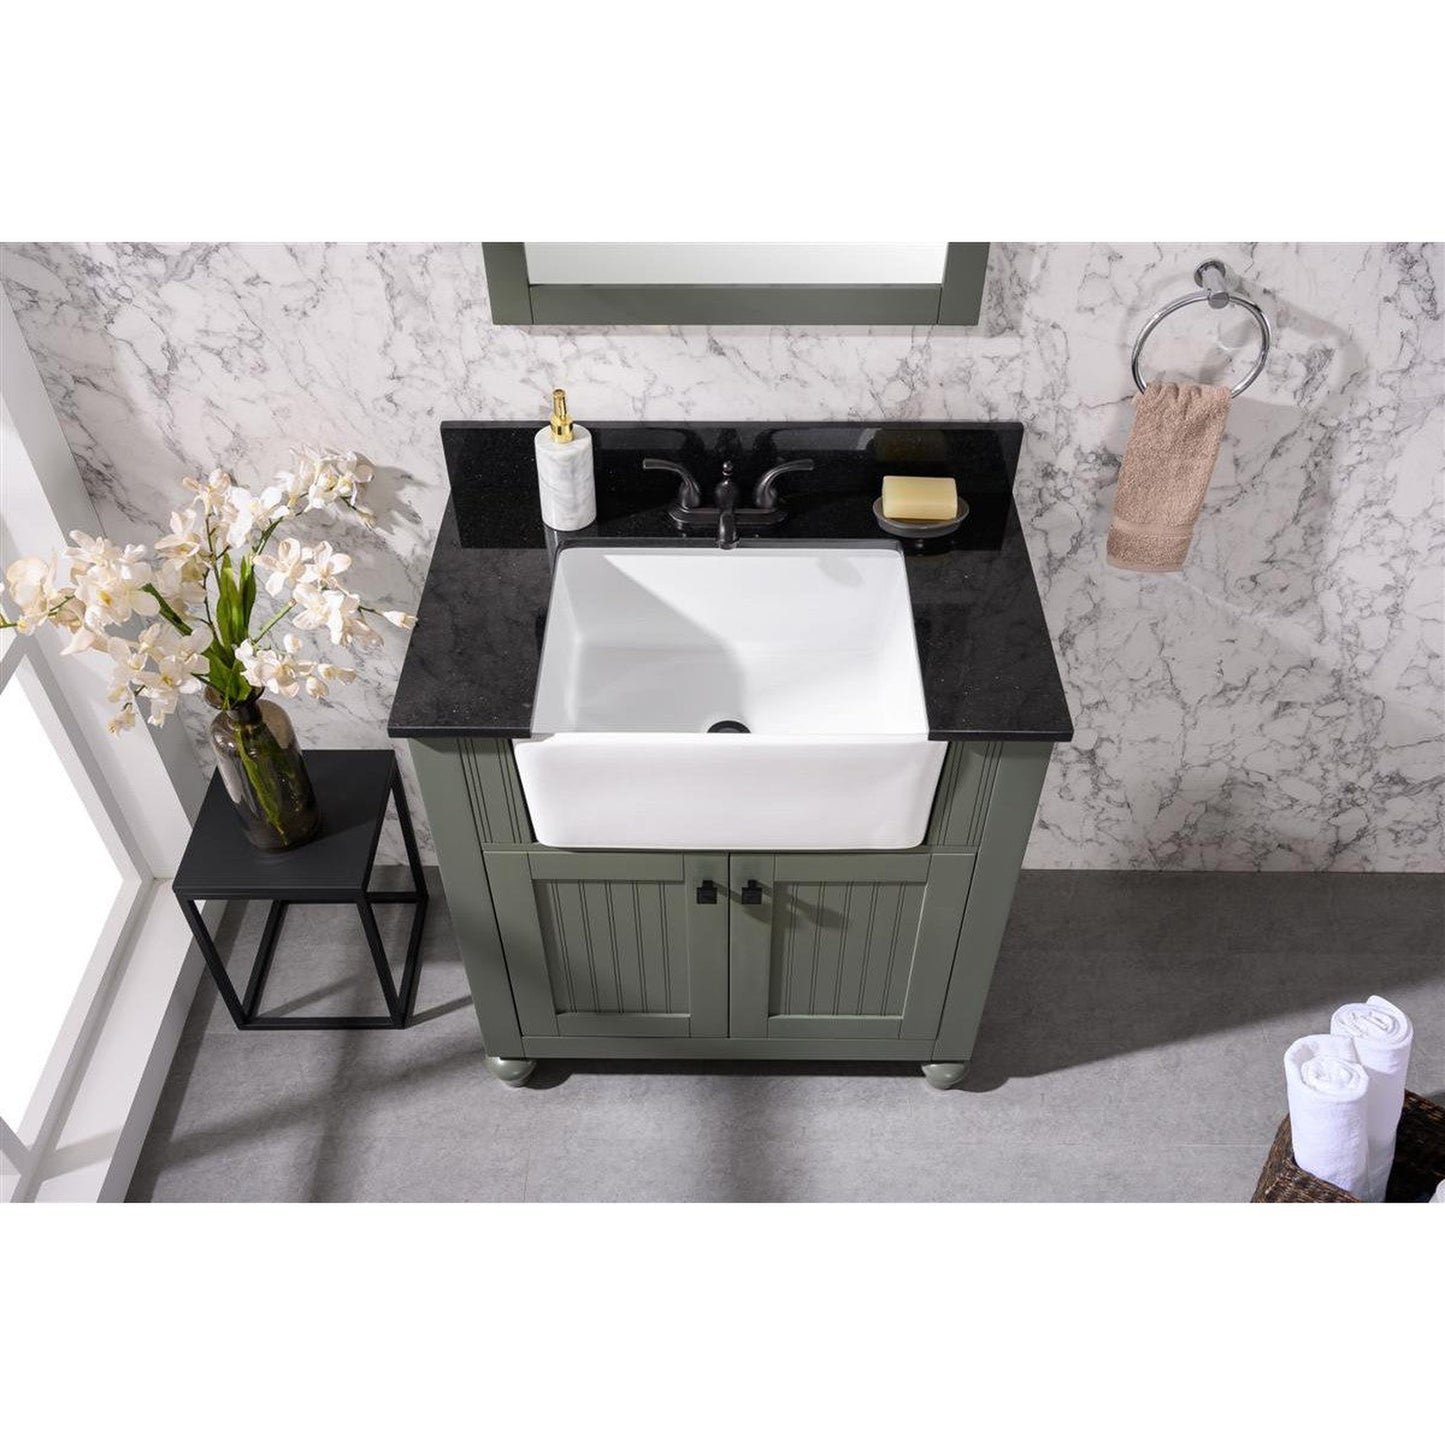 Legion Furniture WLF6022 30" Pewter Green Freestanding Vanity Cabinet With Black Granite Top and White Ceramic Farm Sink